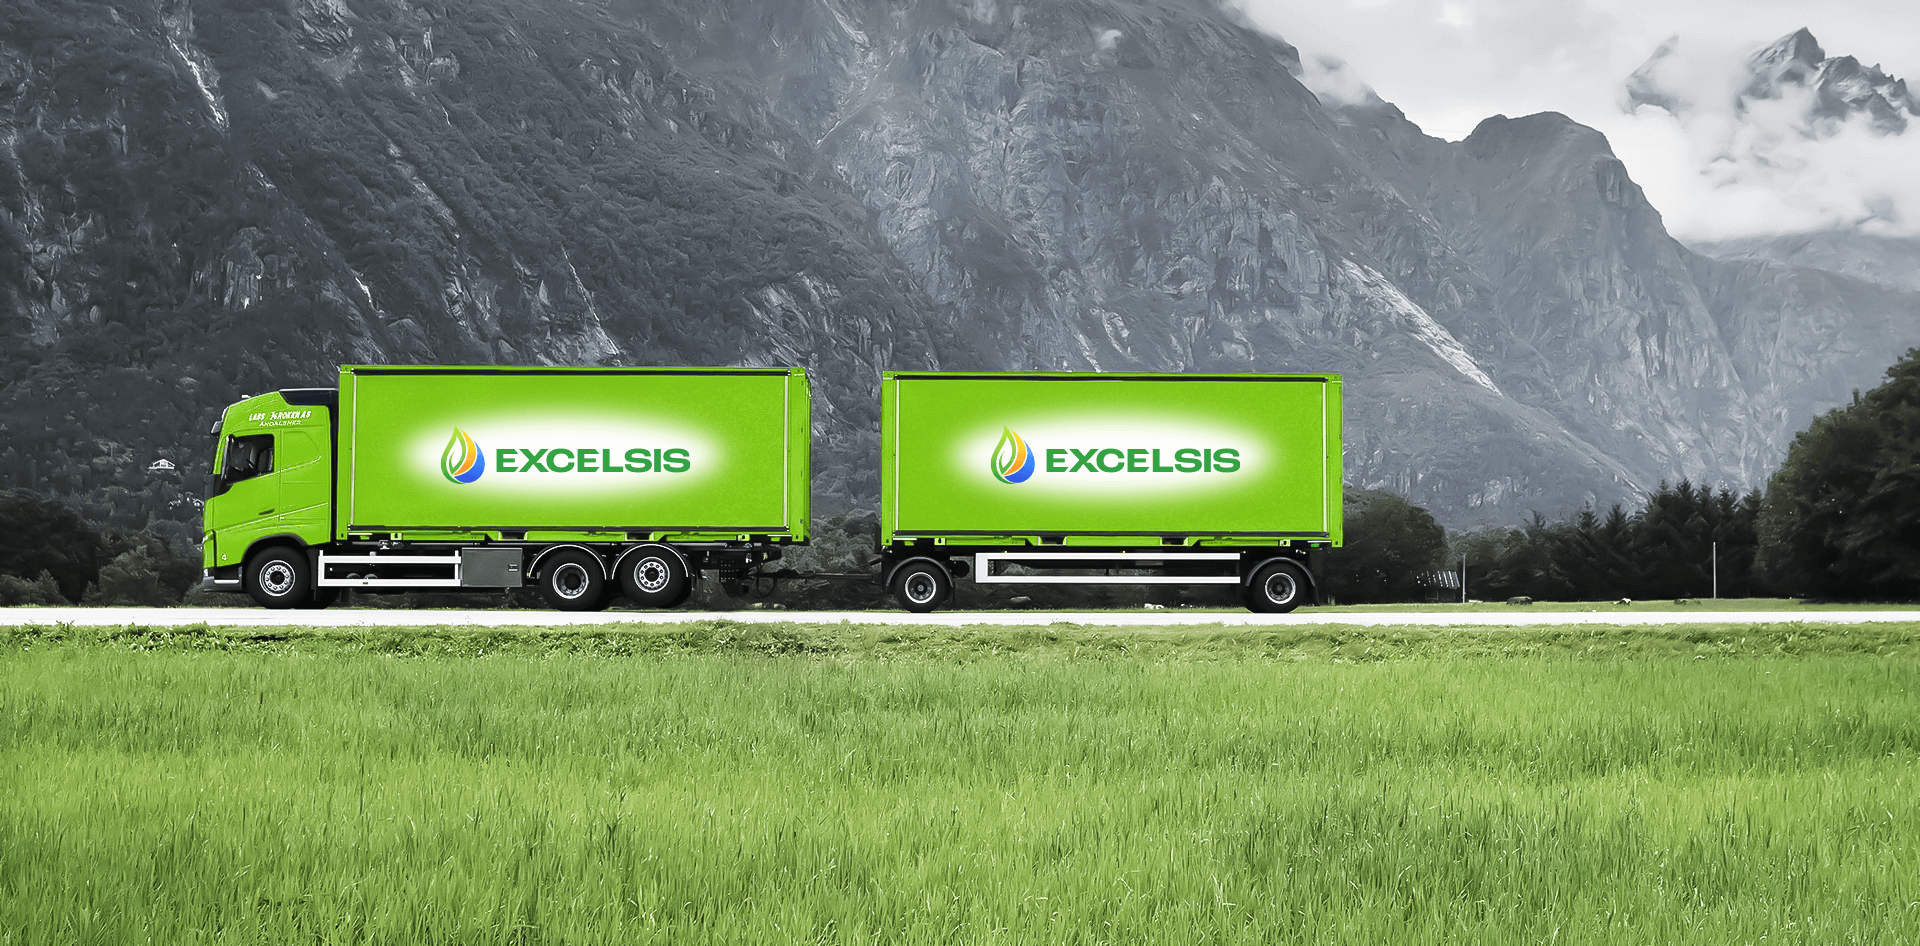 Vehicle Design for Excelsis Energy Company